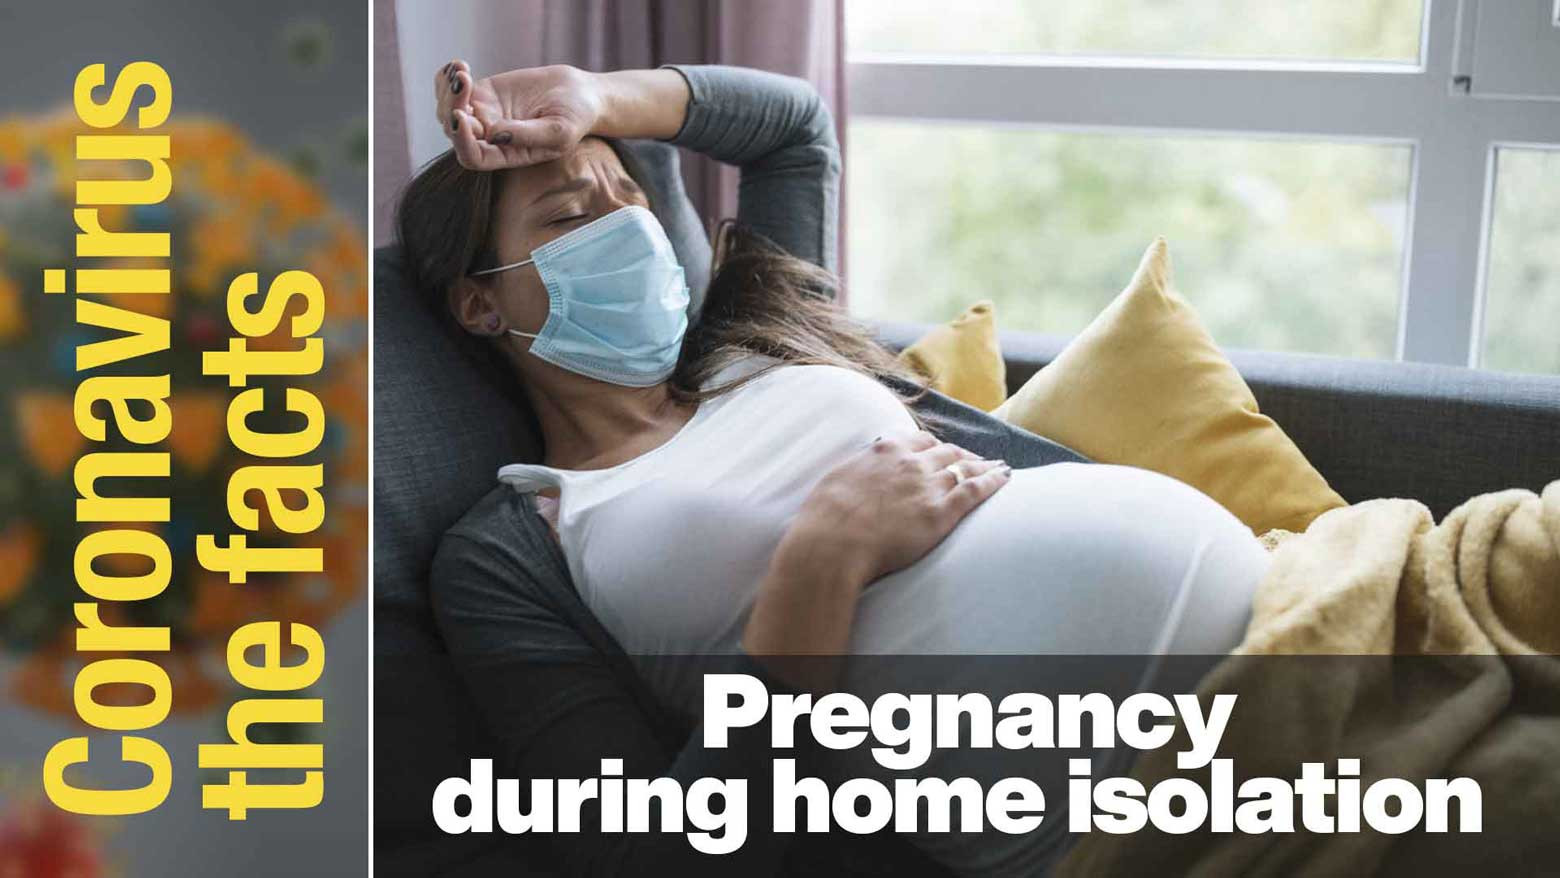 Guidelines for infected pregnant women isolating at home